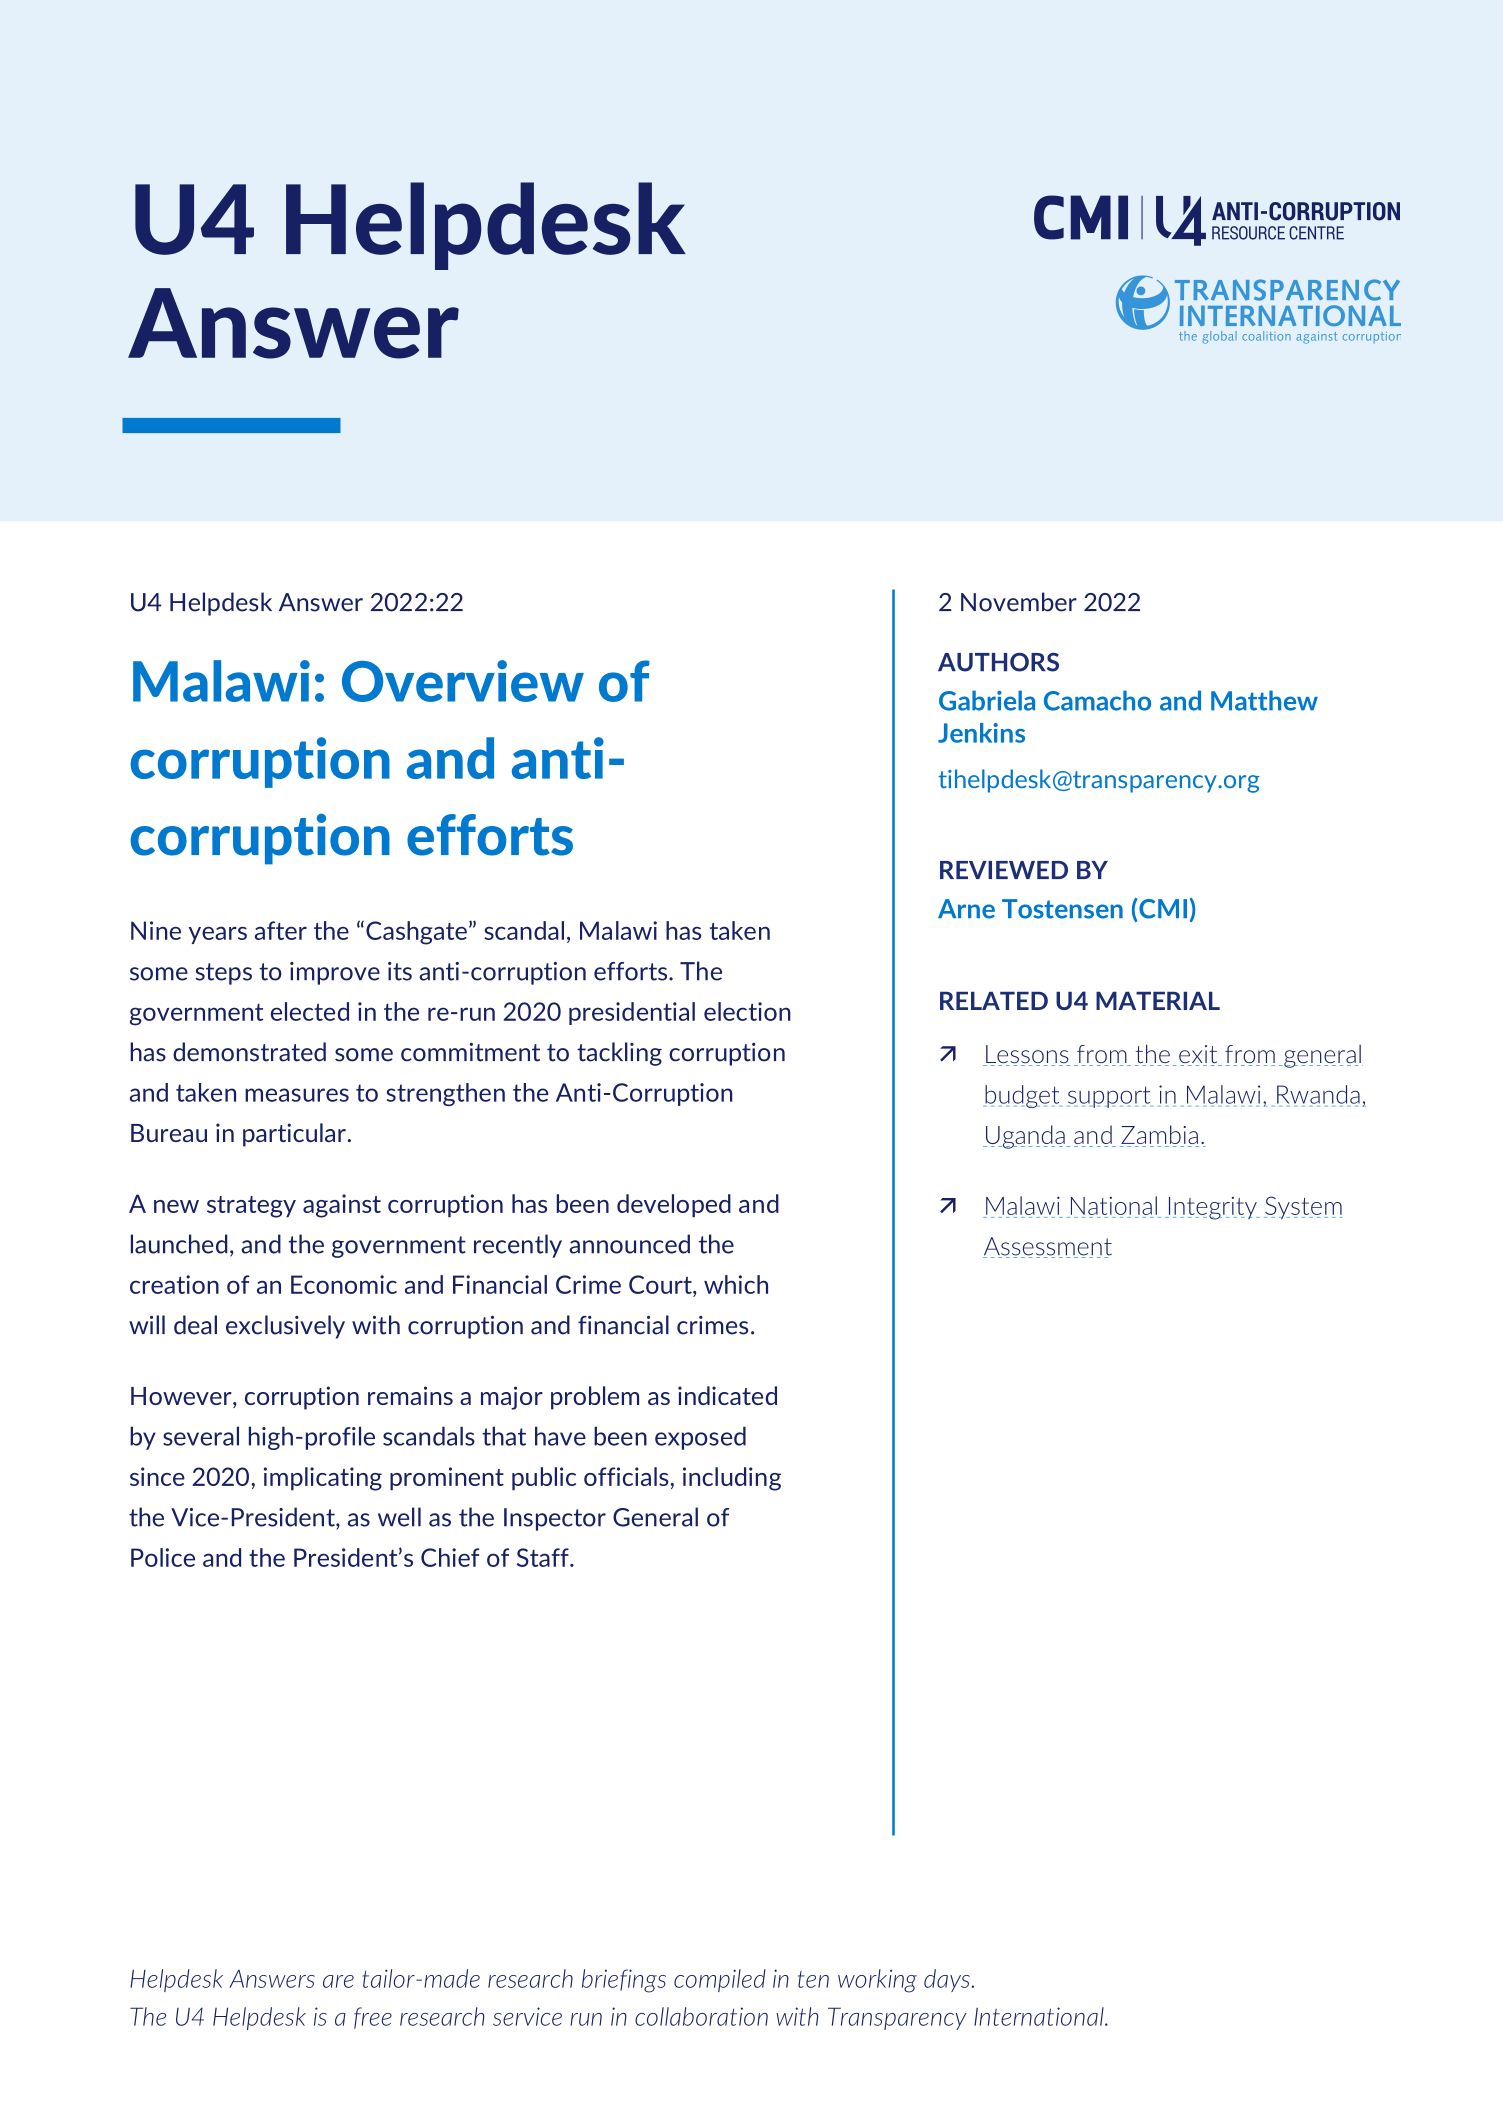 Malawi: Overview of corruption and anti-corruption efforts